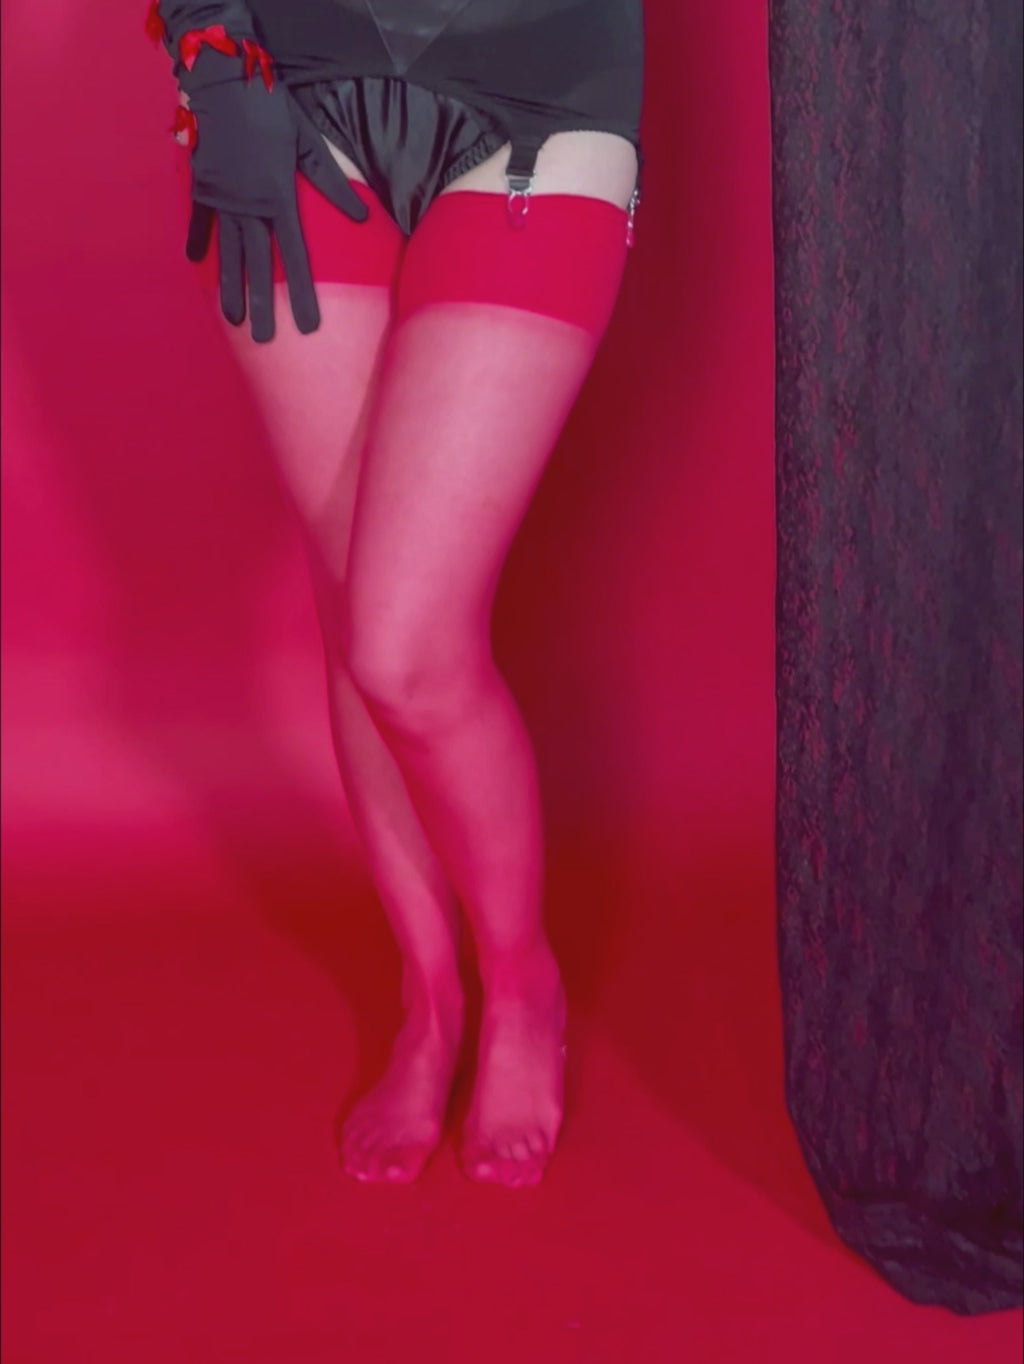 Red seamed stockings inspired by 1920s flapper girls.